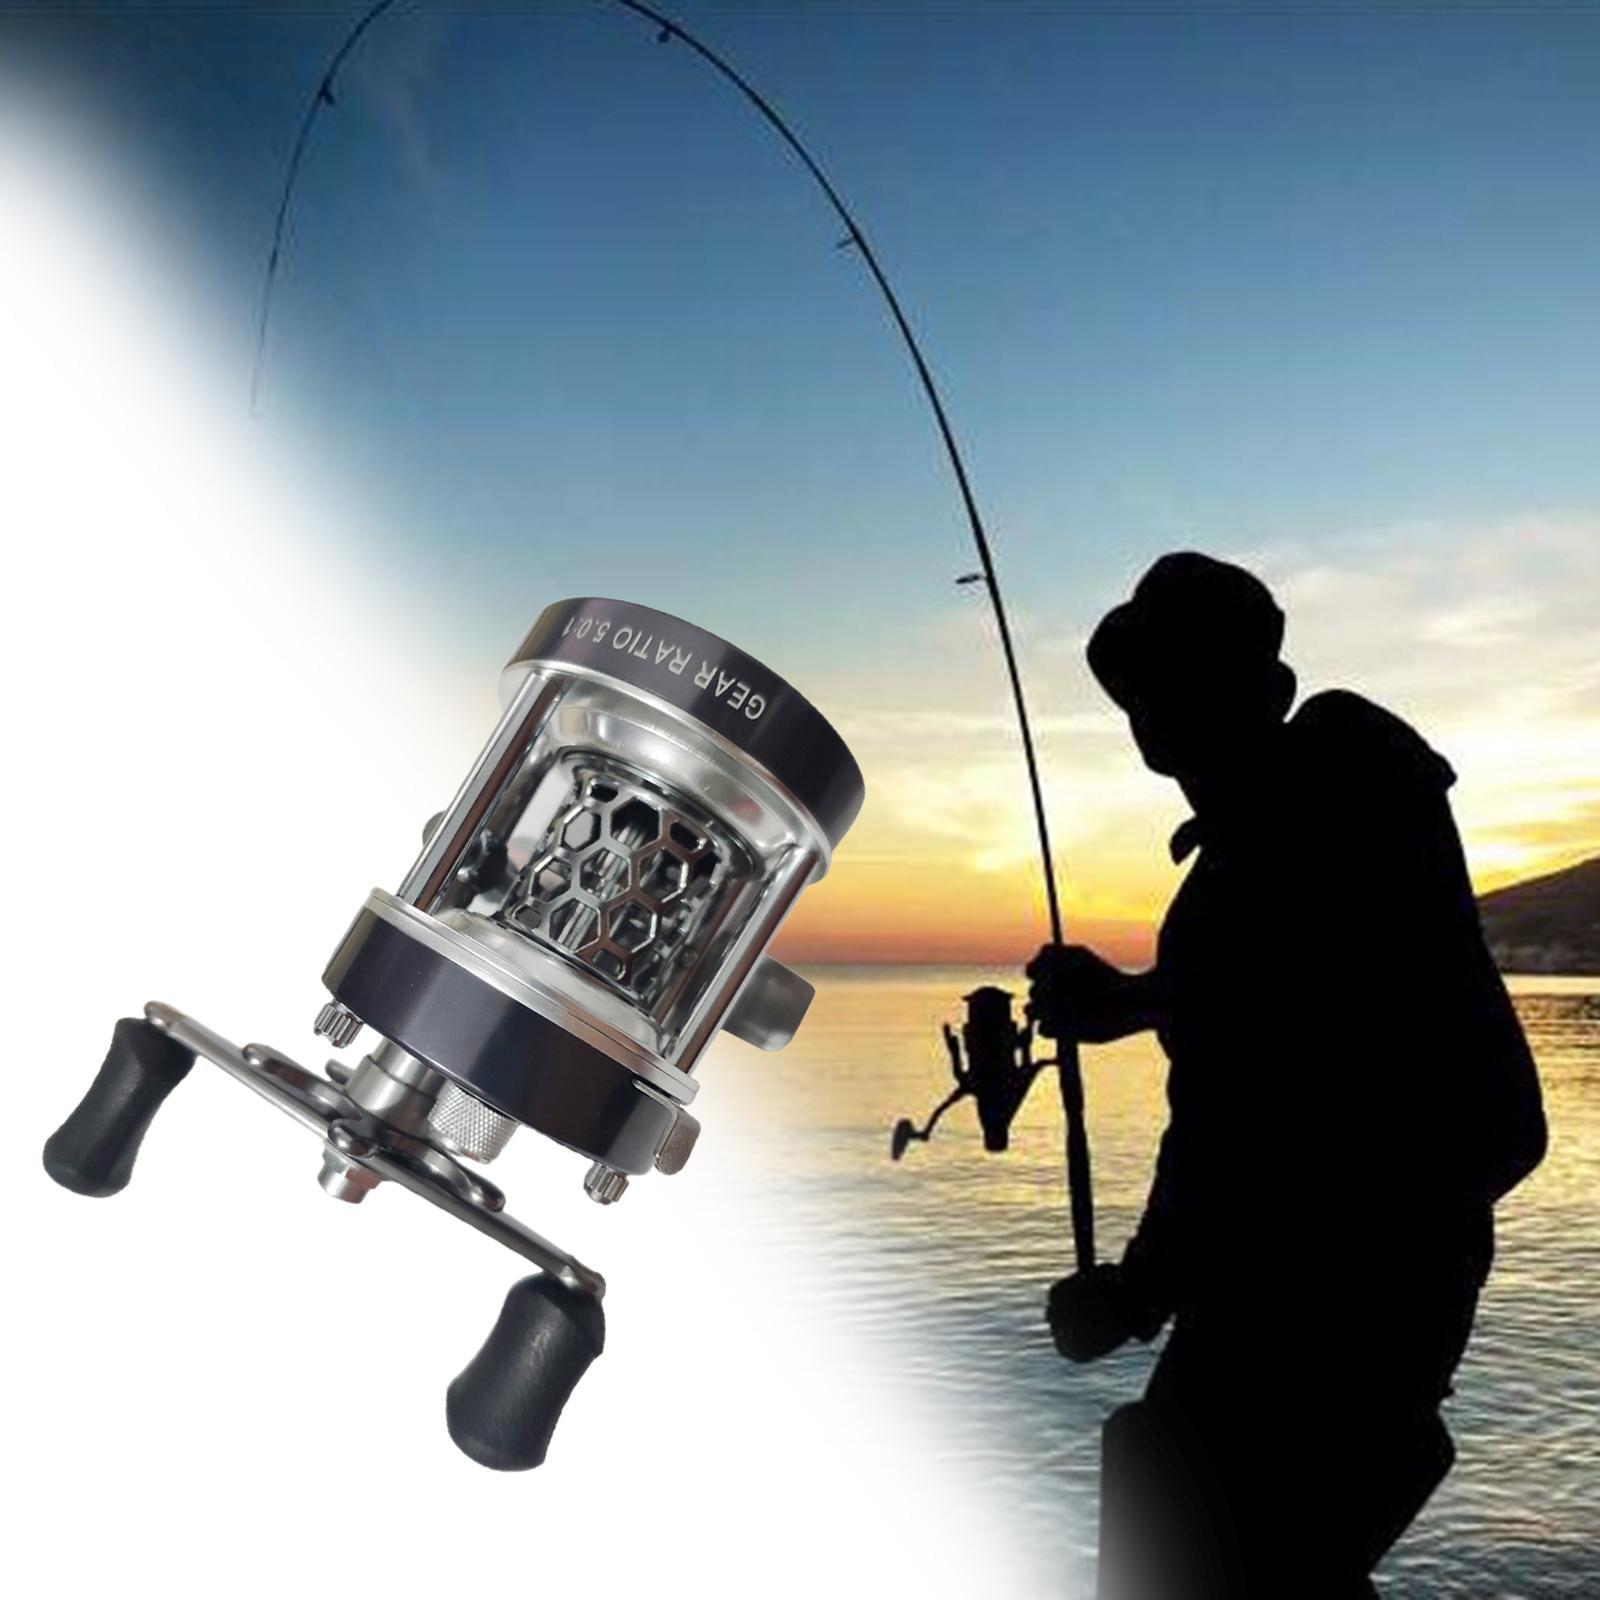 AimdonR Fishing Reel,9+1BB 5.1:1 Left/Right Interchangeable Spinning  Fishing Reel Dual Drag Metal Spools Extremely Smooth for Freshwater  Saltwater 3000 4000 5000 6000 Series : : Sports & Outdoors